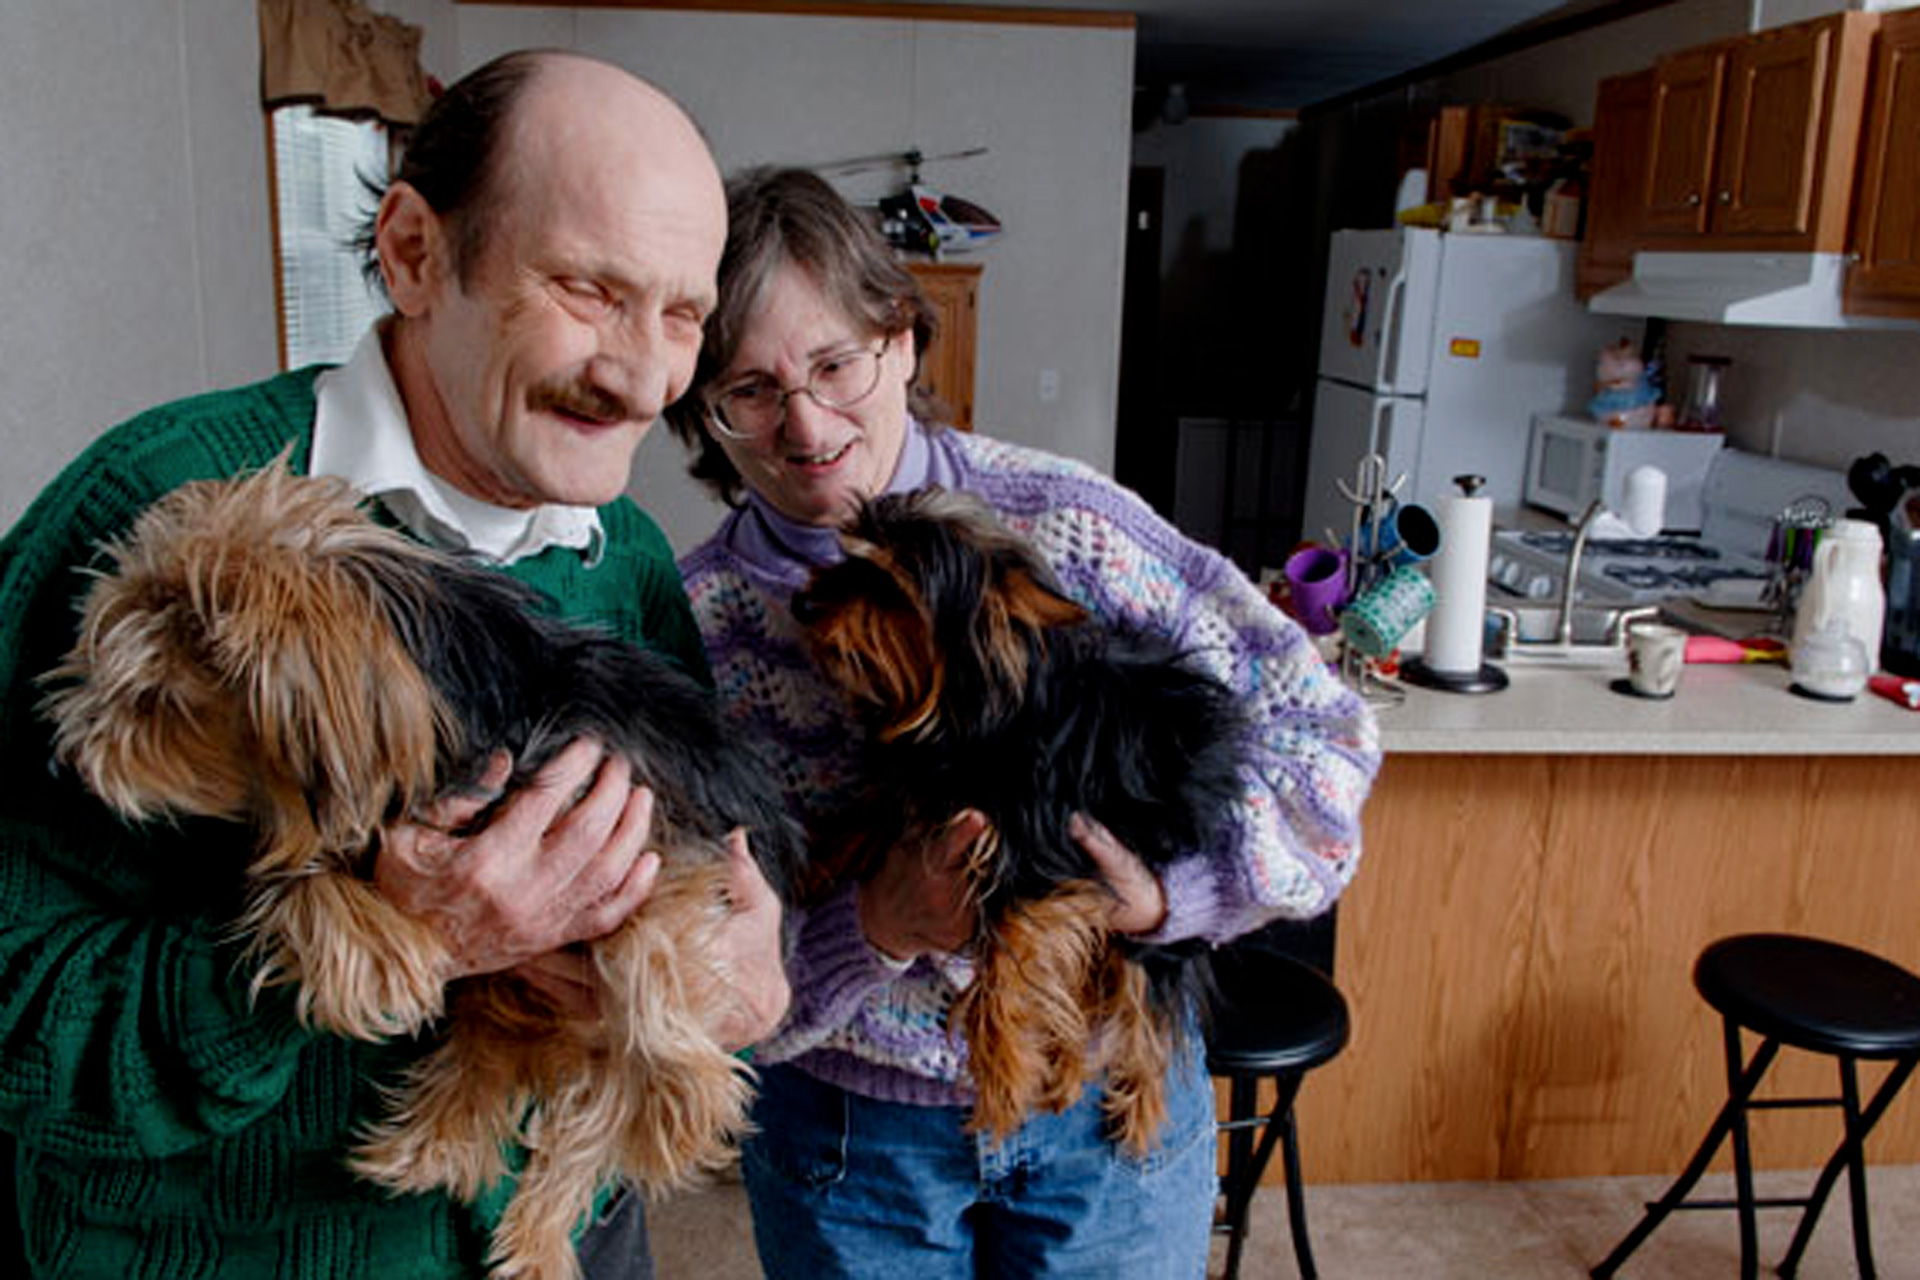 Man and woman holding squirmy dogs in their kitchen